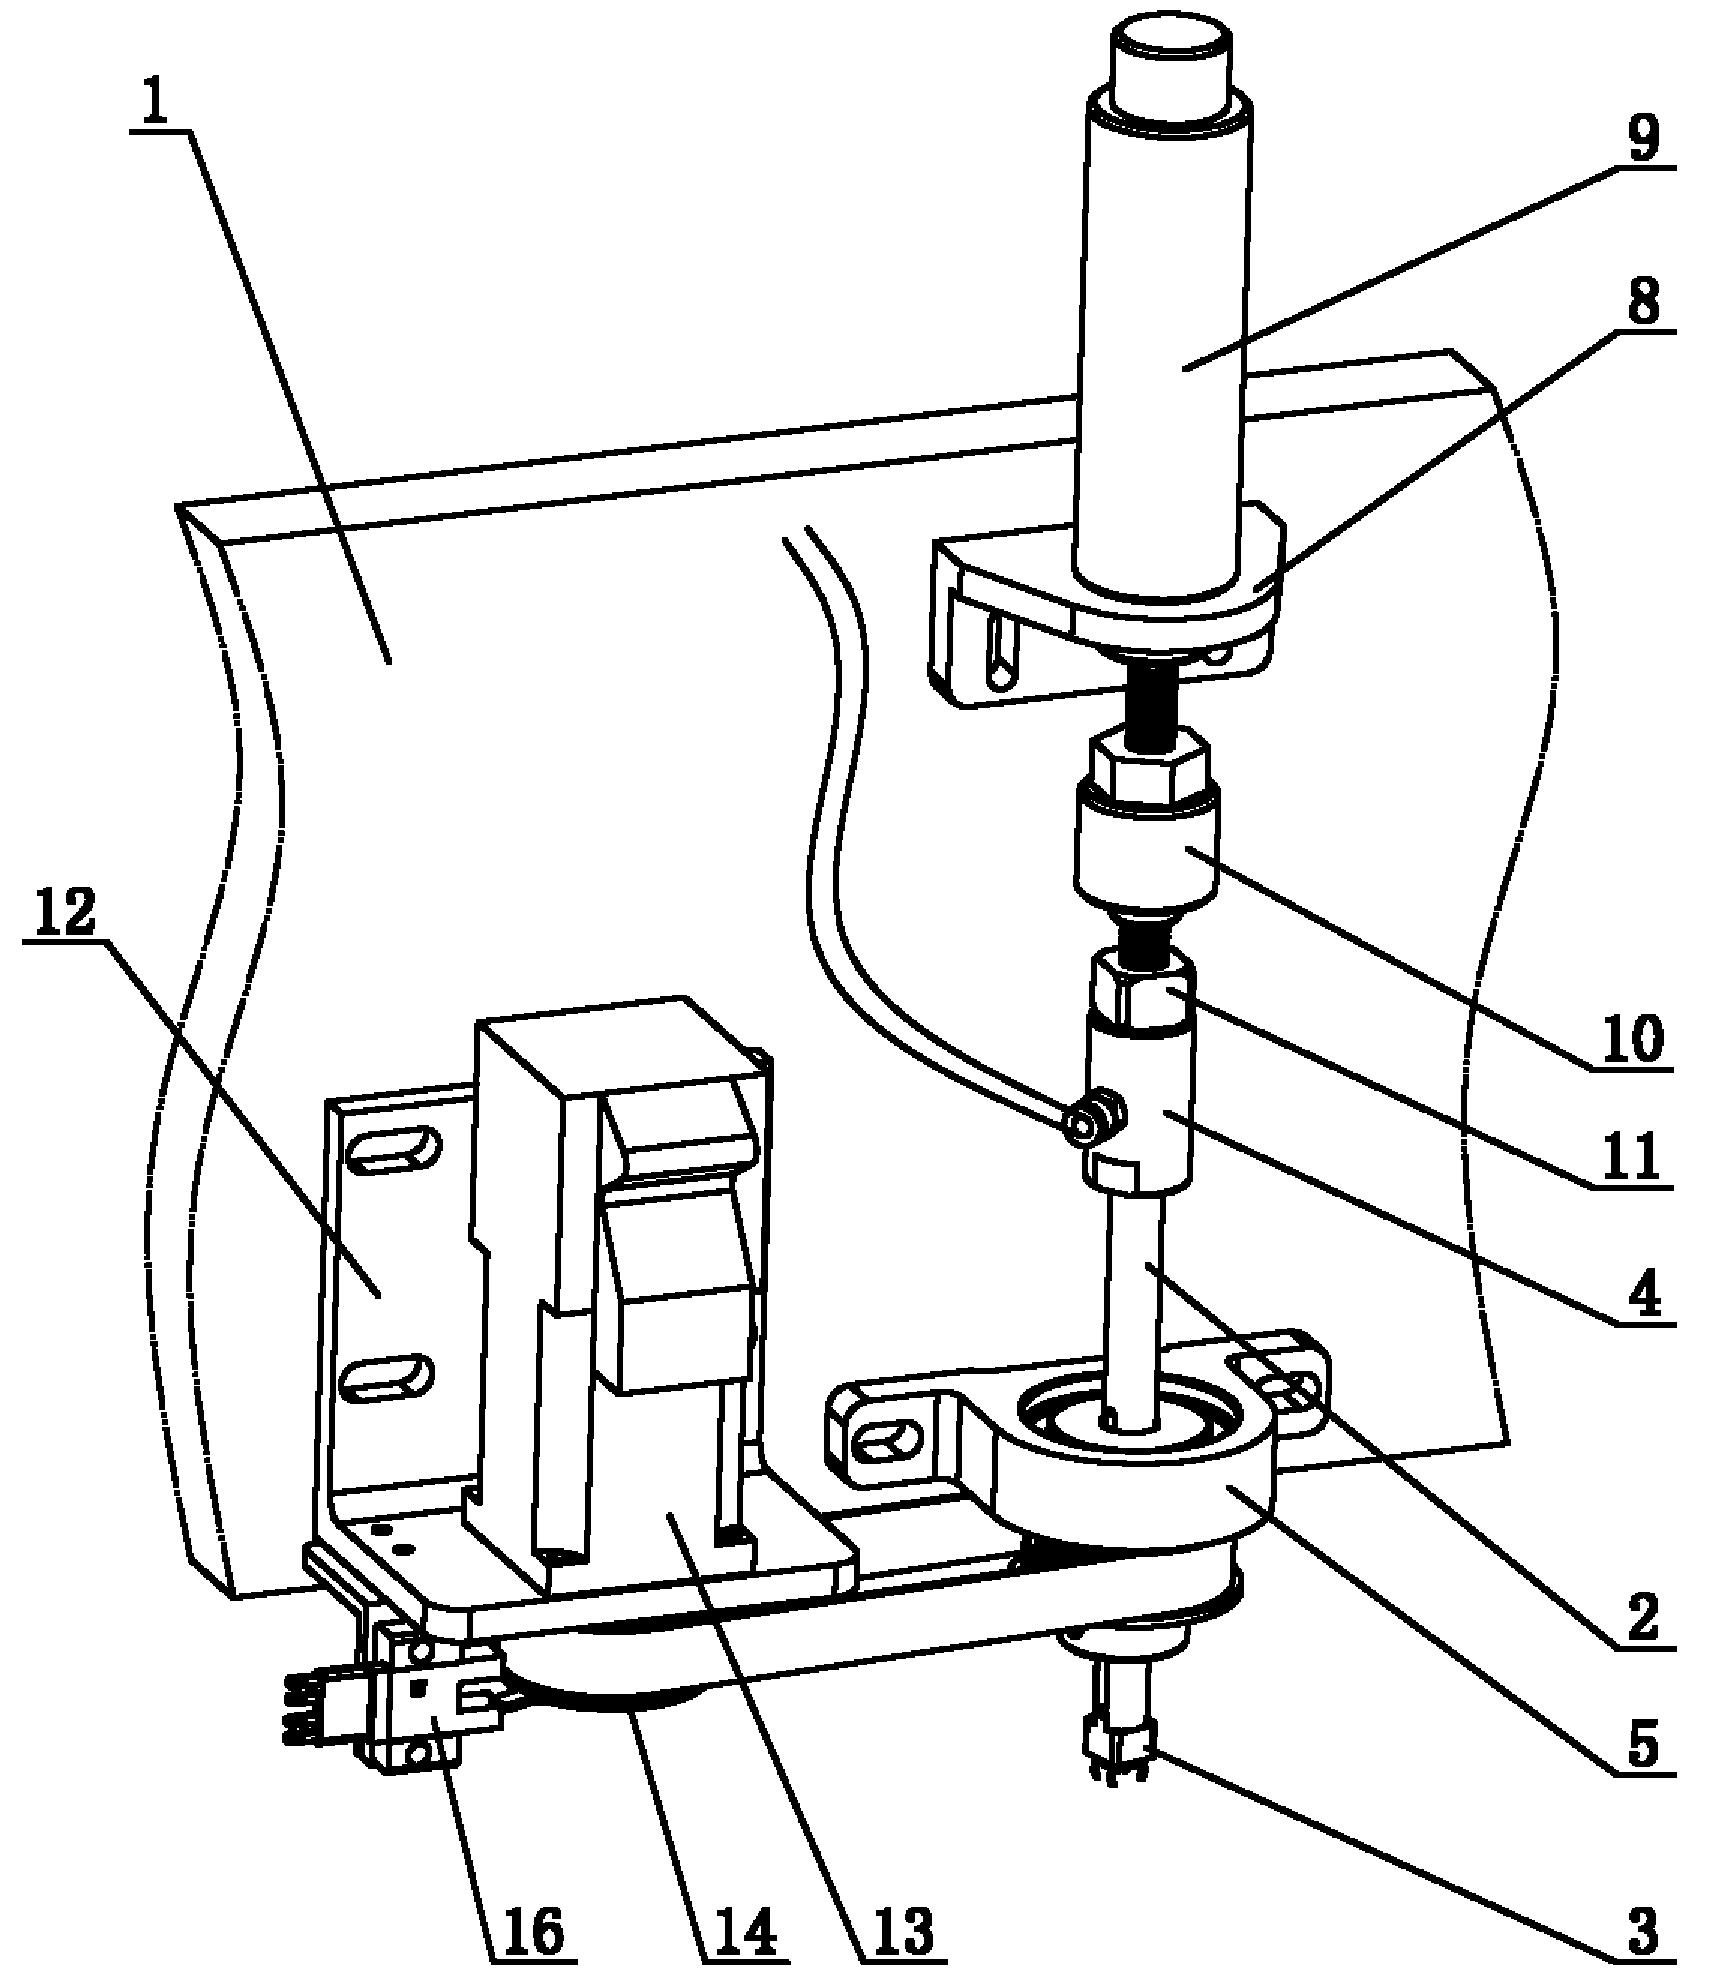 Head air-suction mechanism for inserting machine